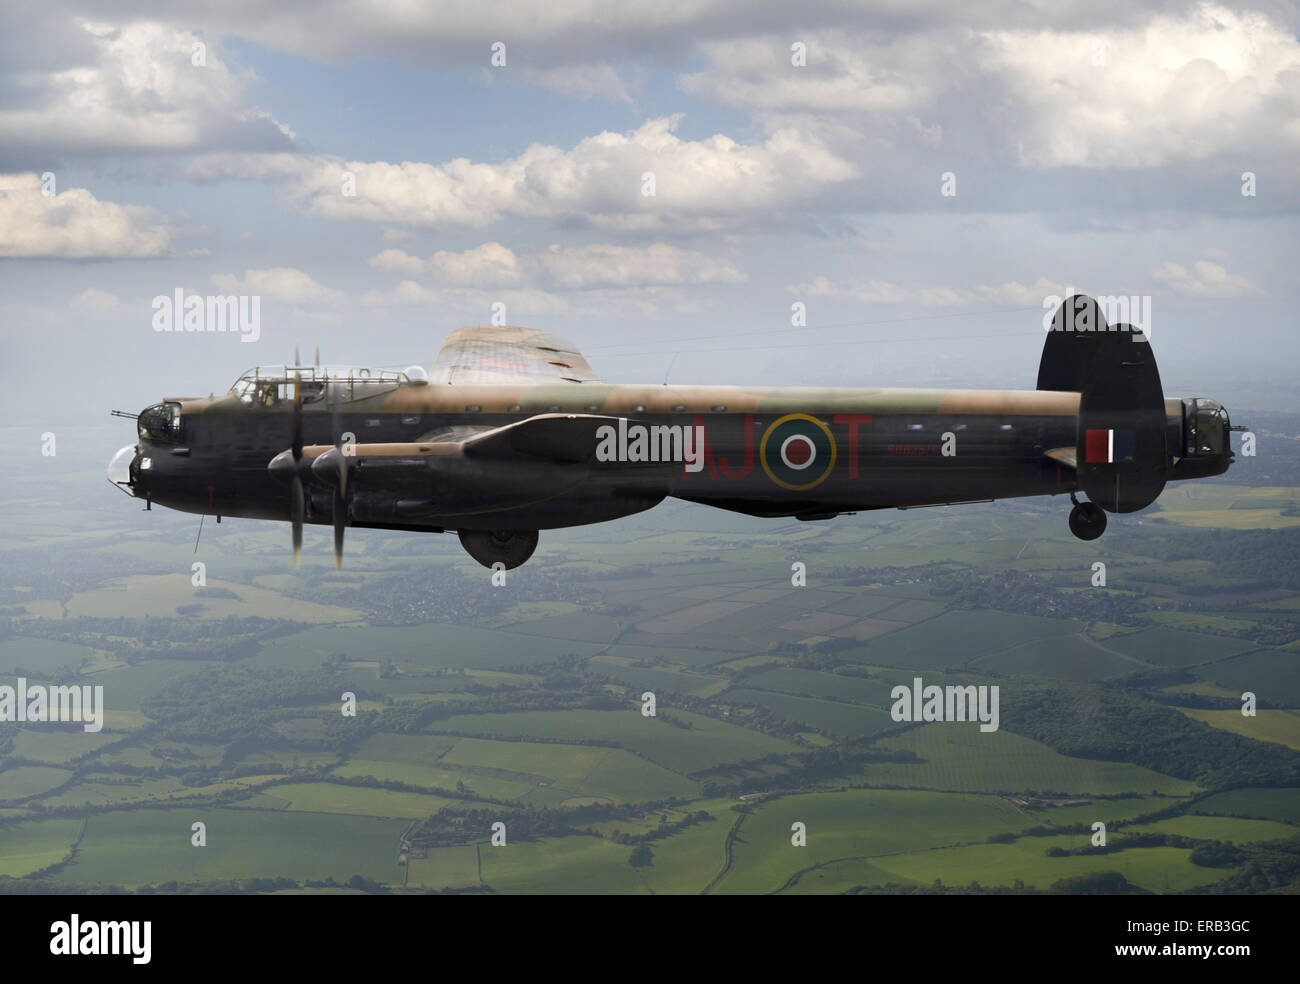 A specially adapted 'Dambuster' Lancaster bomber, Type 464 (Provisioning), ED825/G, coded AJ-T, as flown by Joe McCarthy. Stock Photo